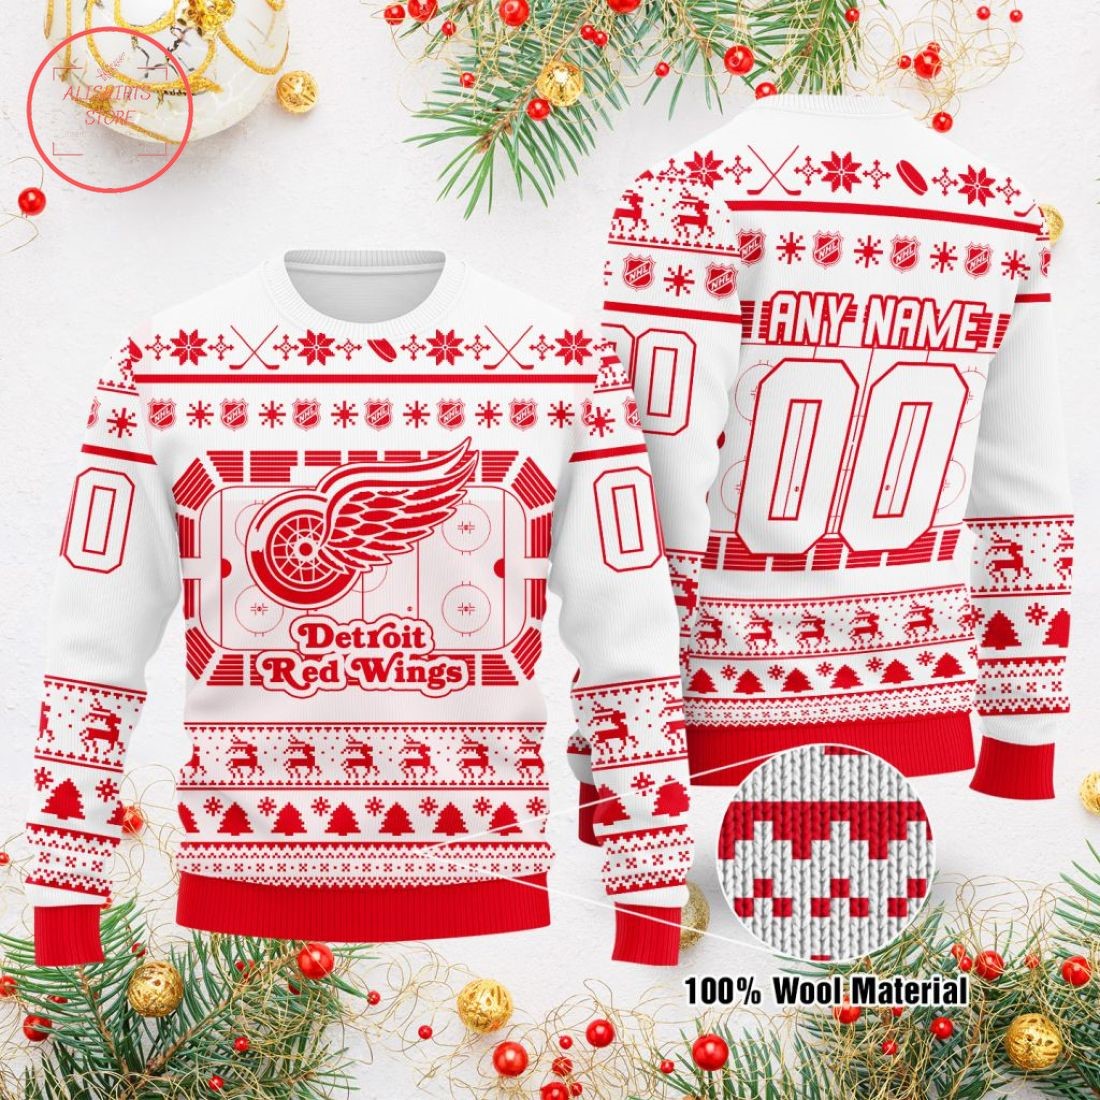 Detroit Red Wings NHL Ice Hockey 3D Ugly Sweater - Owl Fashion Shop